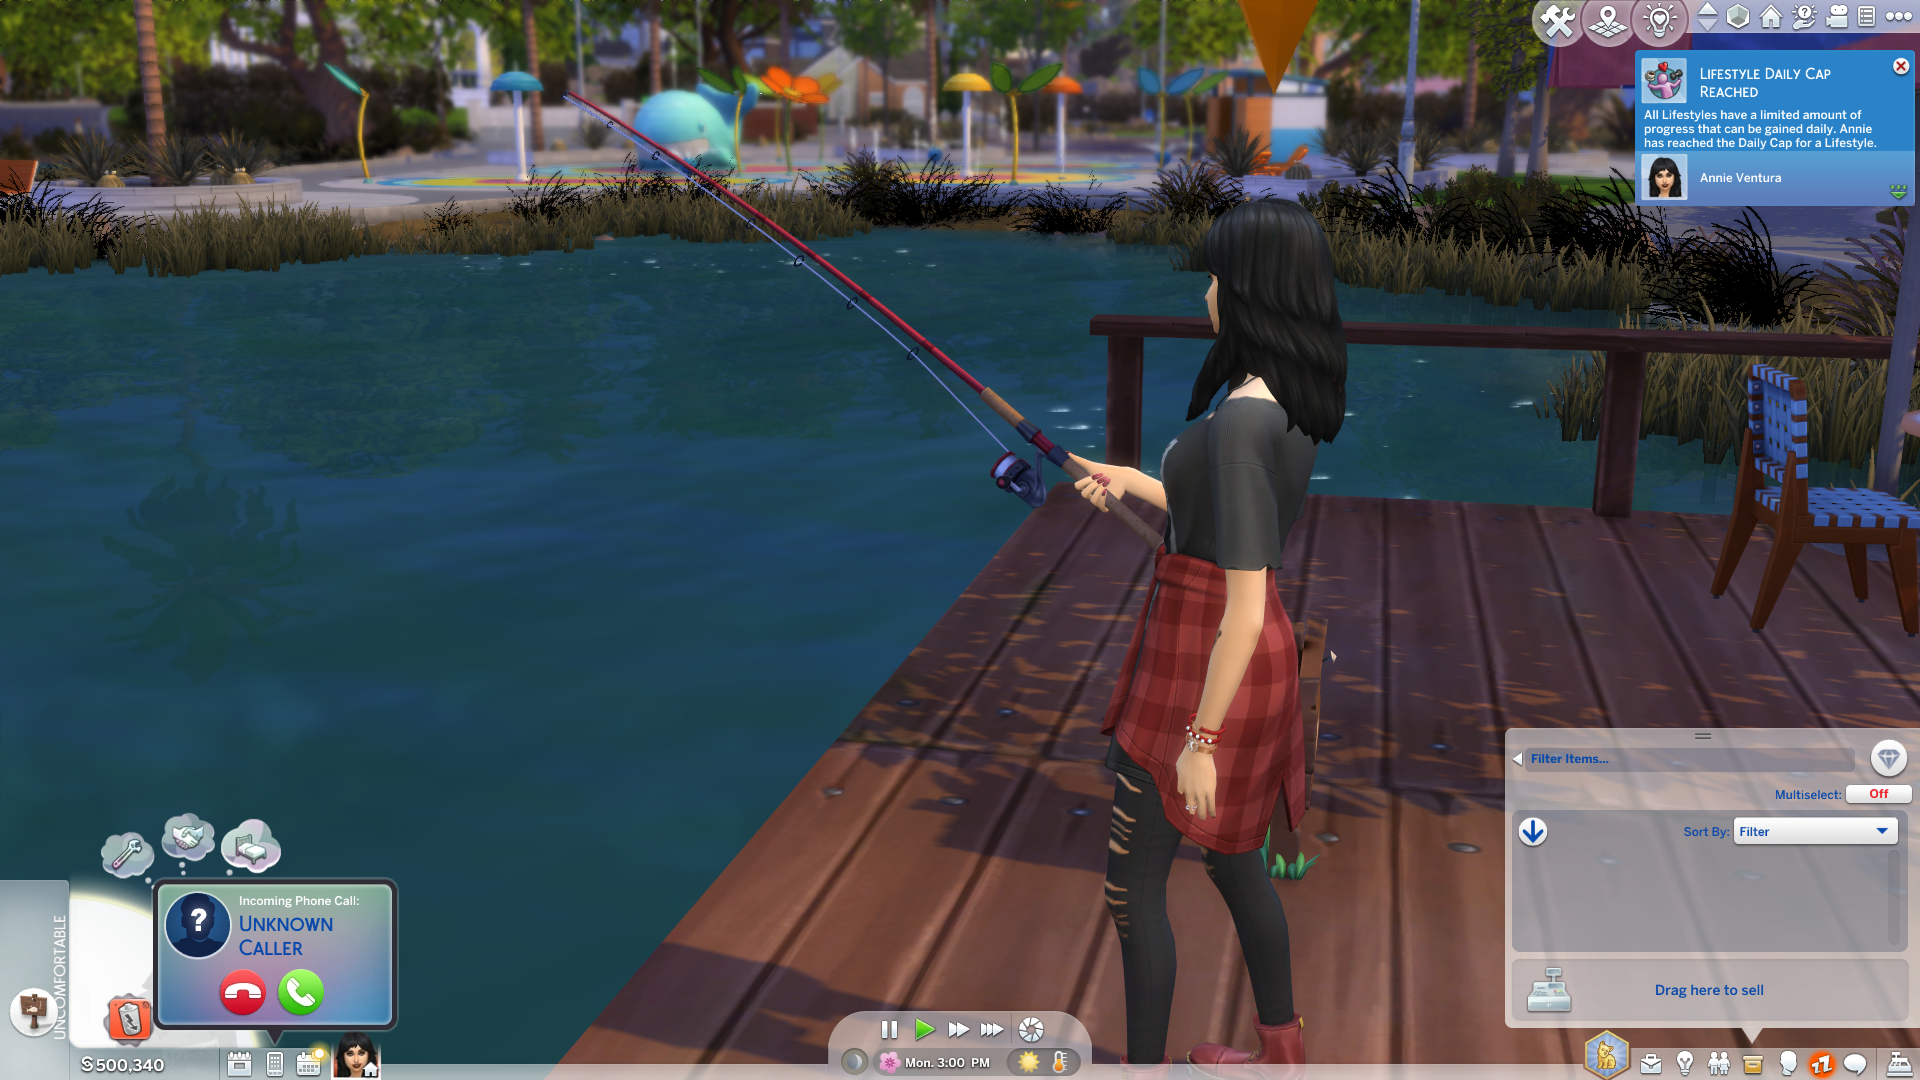 Fishing from a pier in The Sims 4